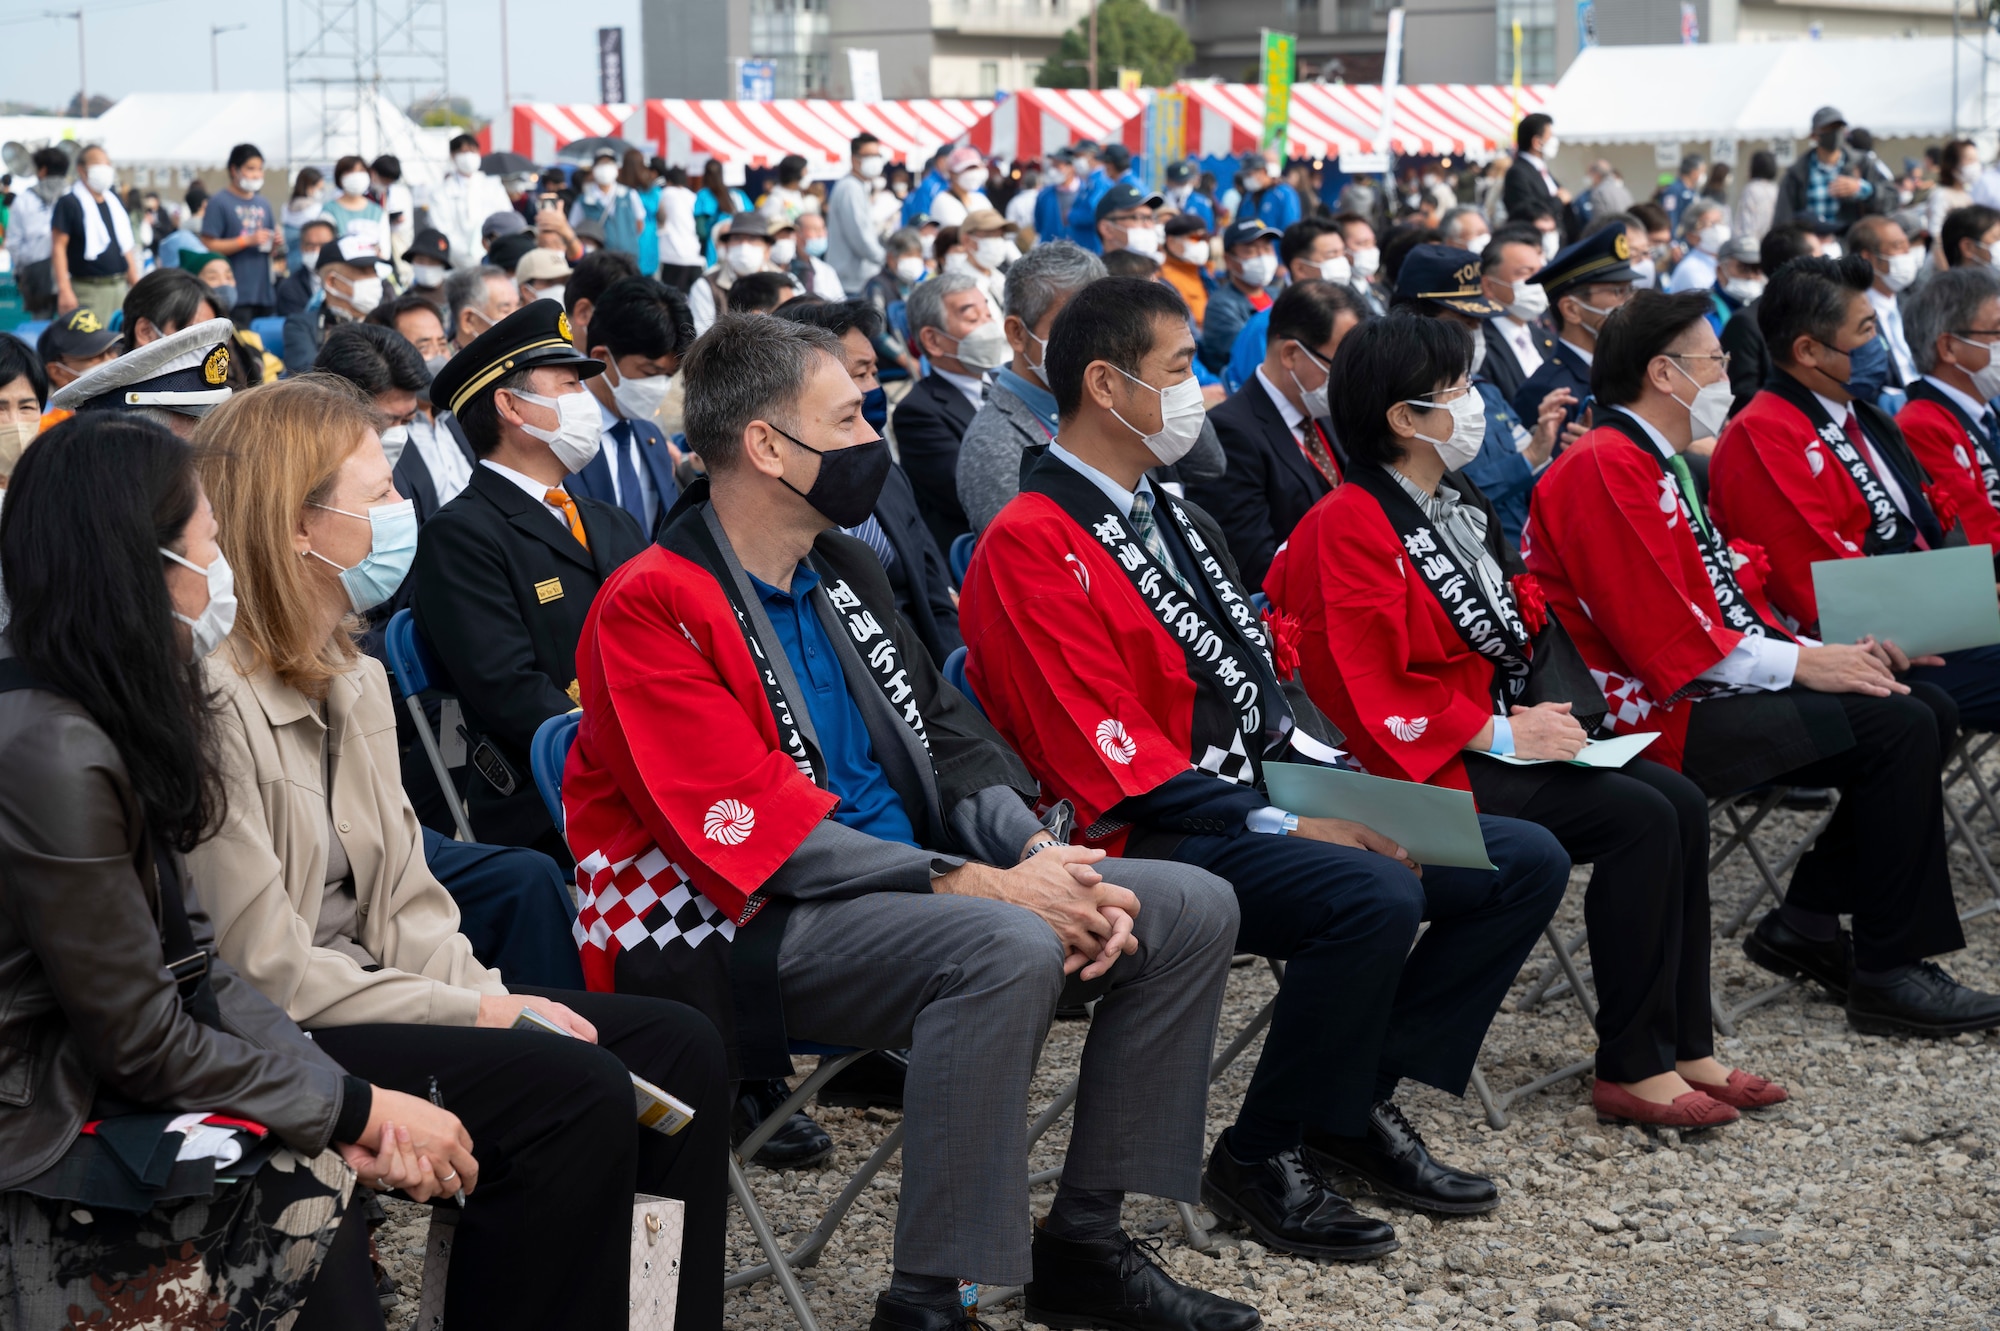 Festival attendees sitting in chairs listening to opening remarks